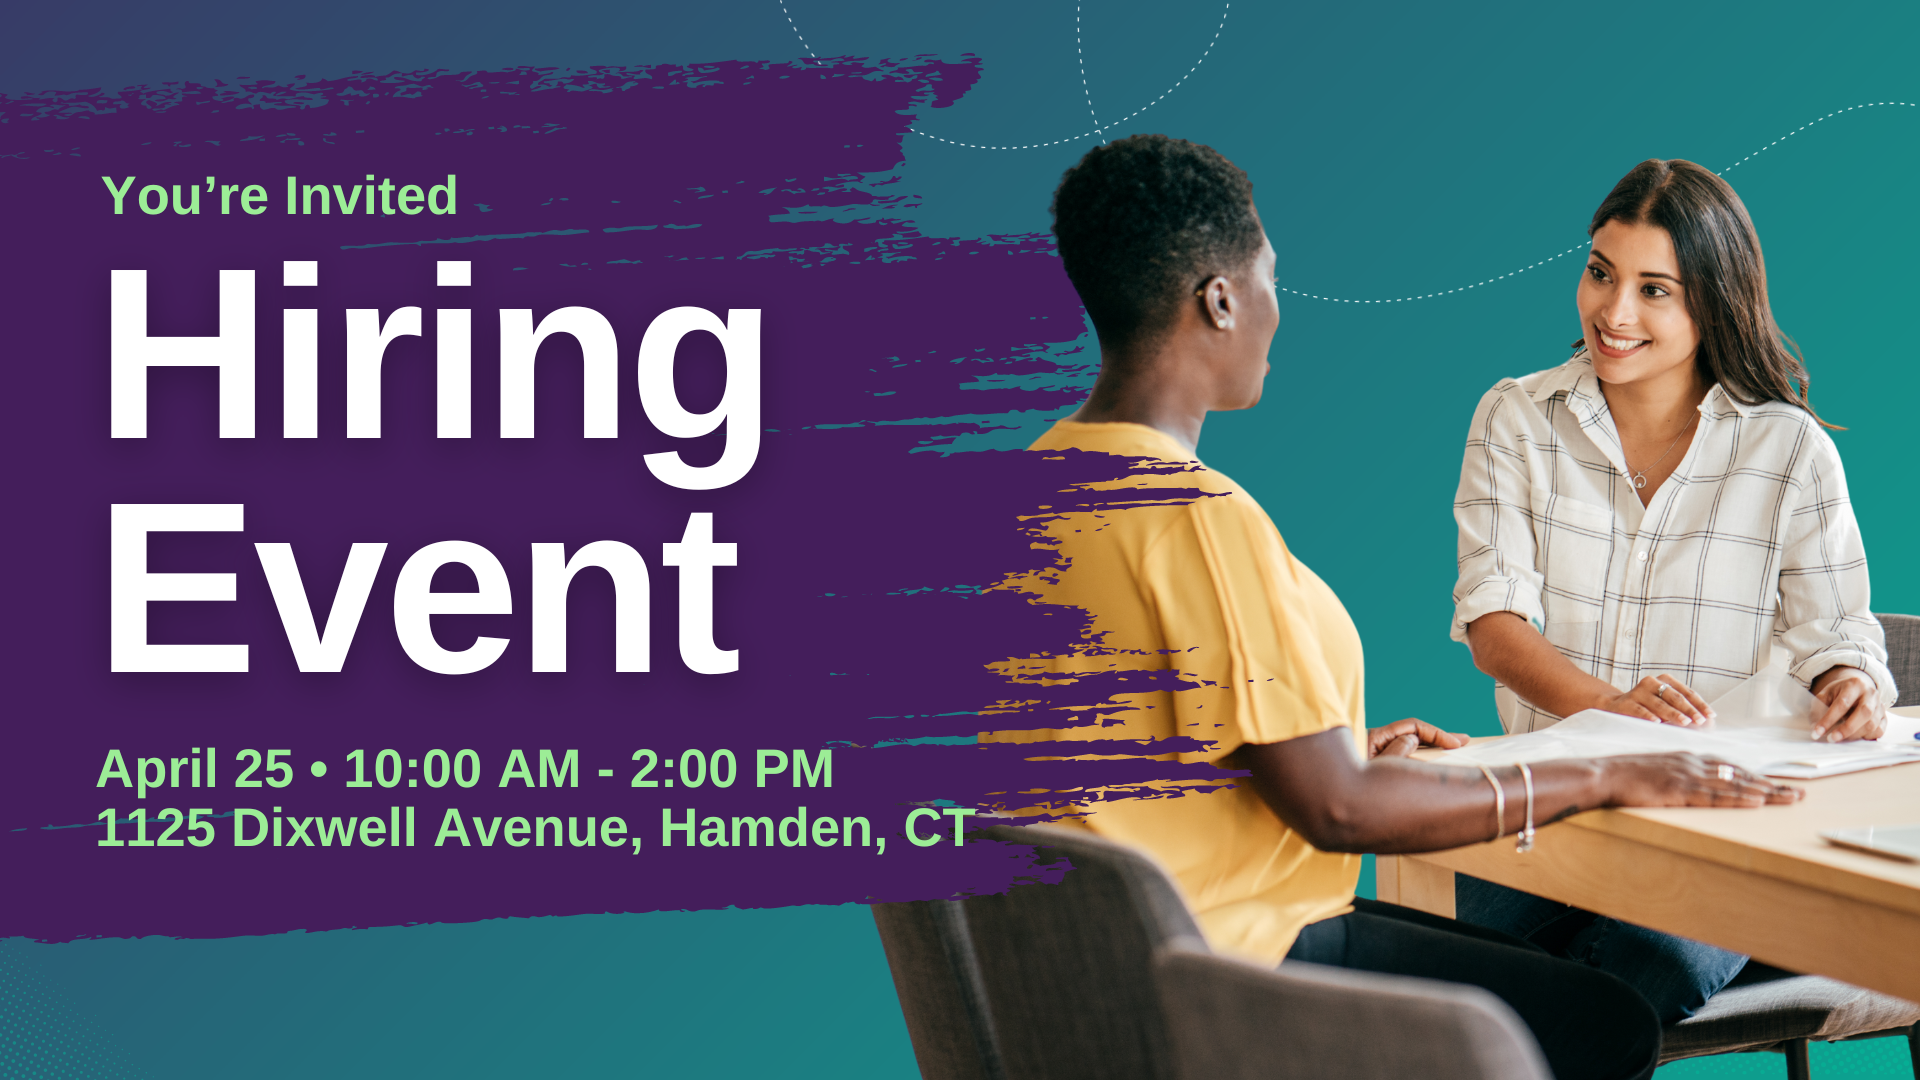 You're Invited! Hiring event on April 25 from 10AM to 2:30PM at 1125 Dixwell Avenue, Hamden, CT.